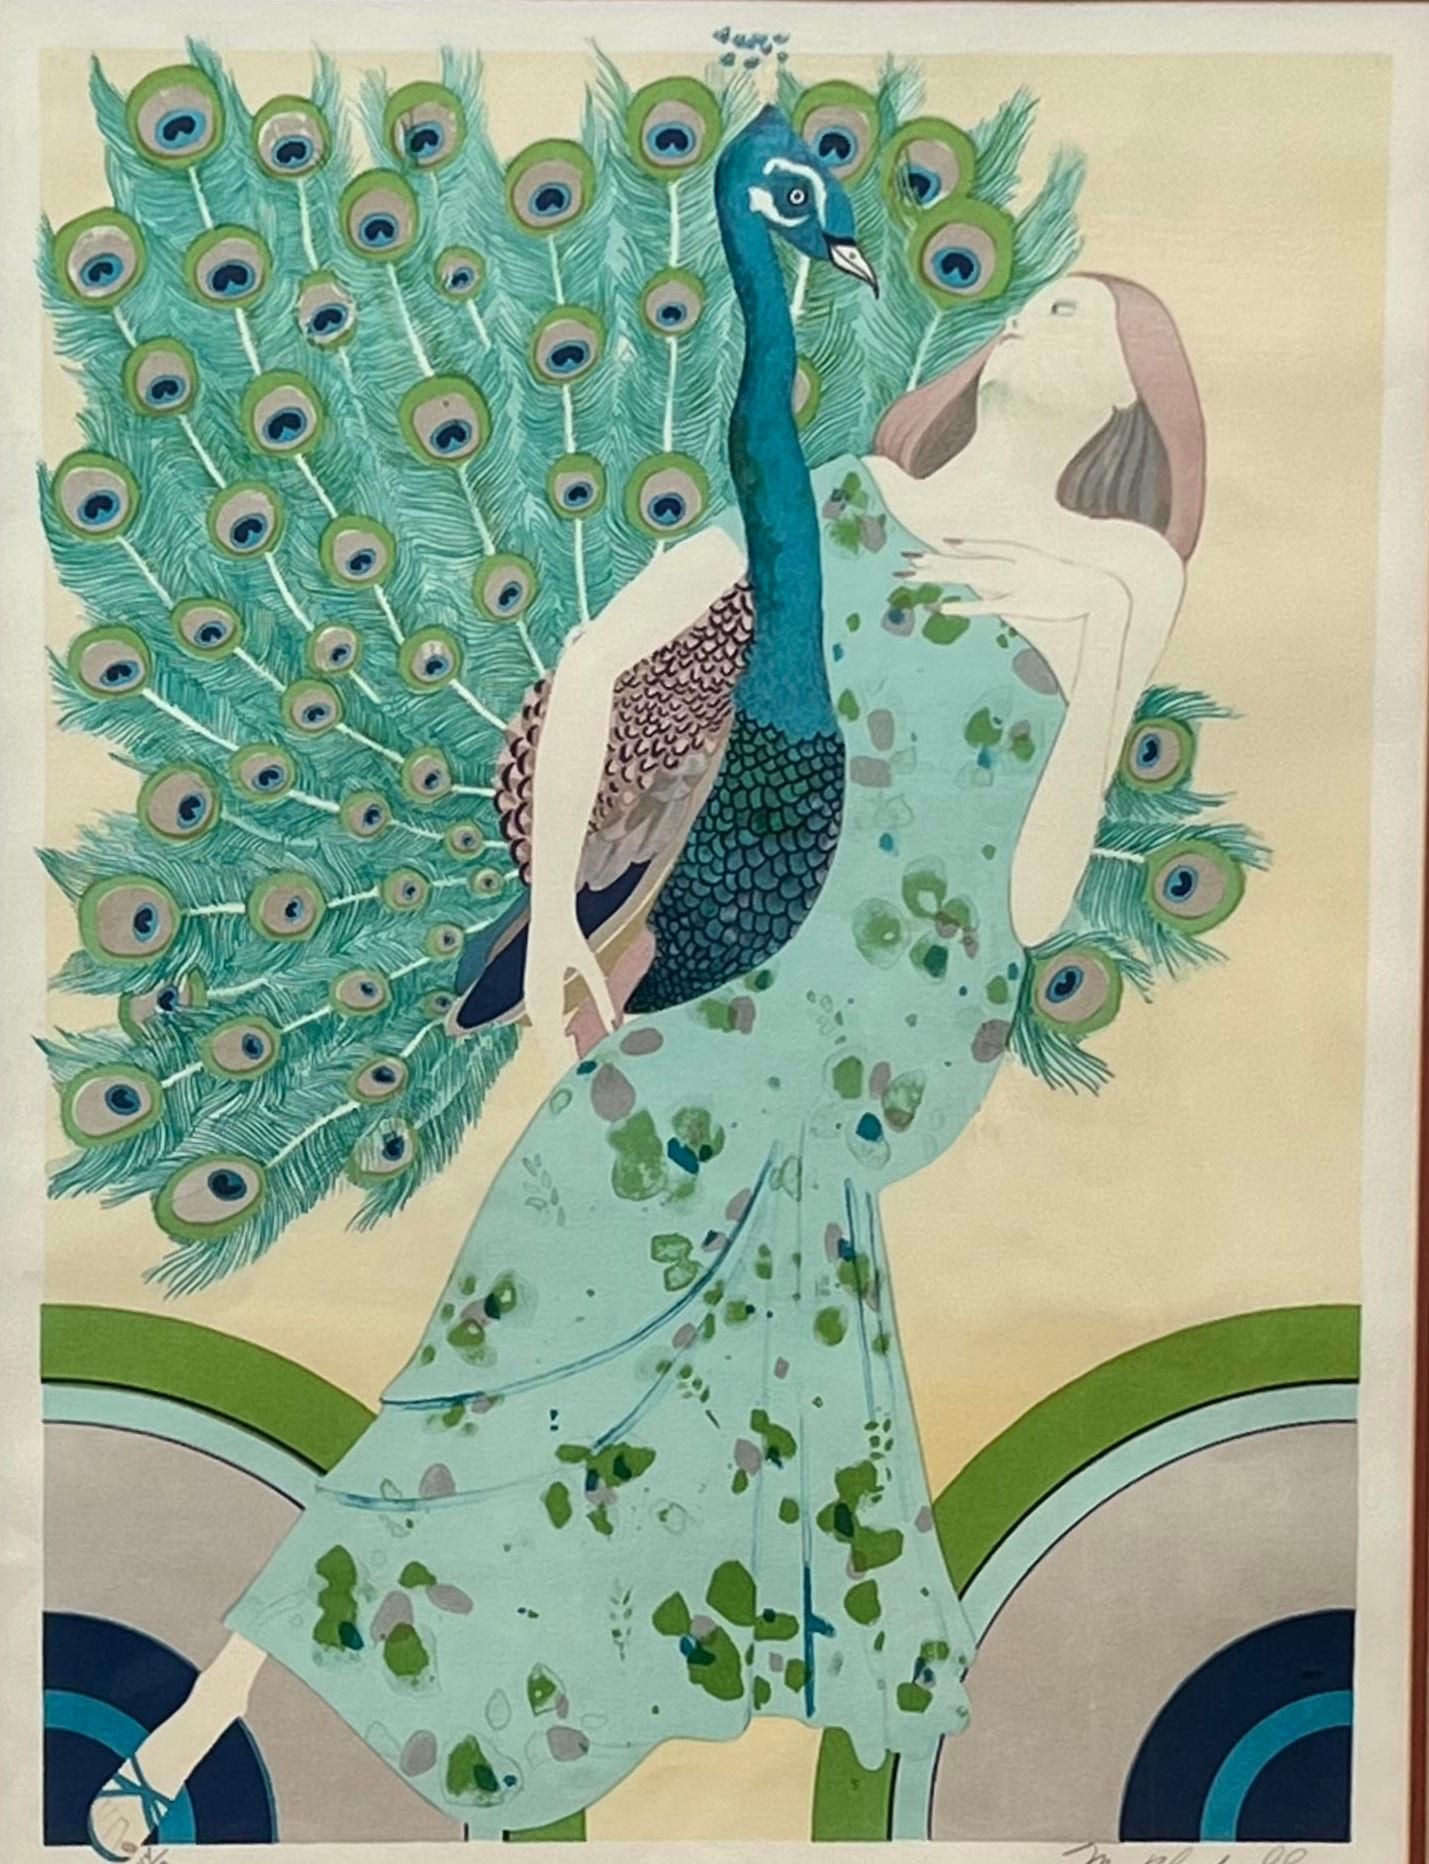 Utilizing the peacock as an emblematic Art Nouveau animal, a favorite of early 20th-century illustrators and designers, Mr. Blackwell, who was born in 1925, delivers a powerfully aesthetic scene between a woman and a peacock in this lithograph,